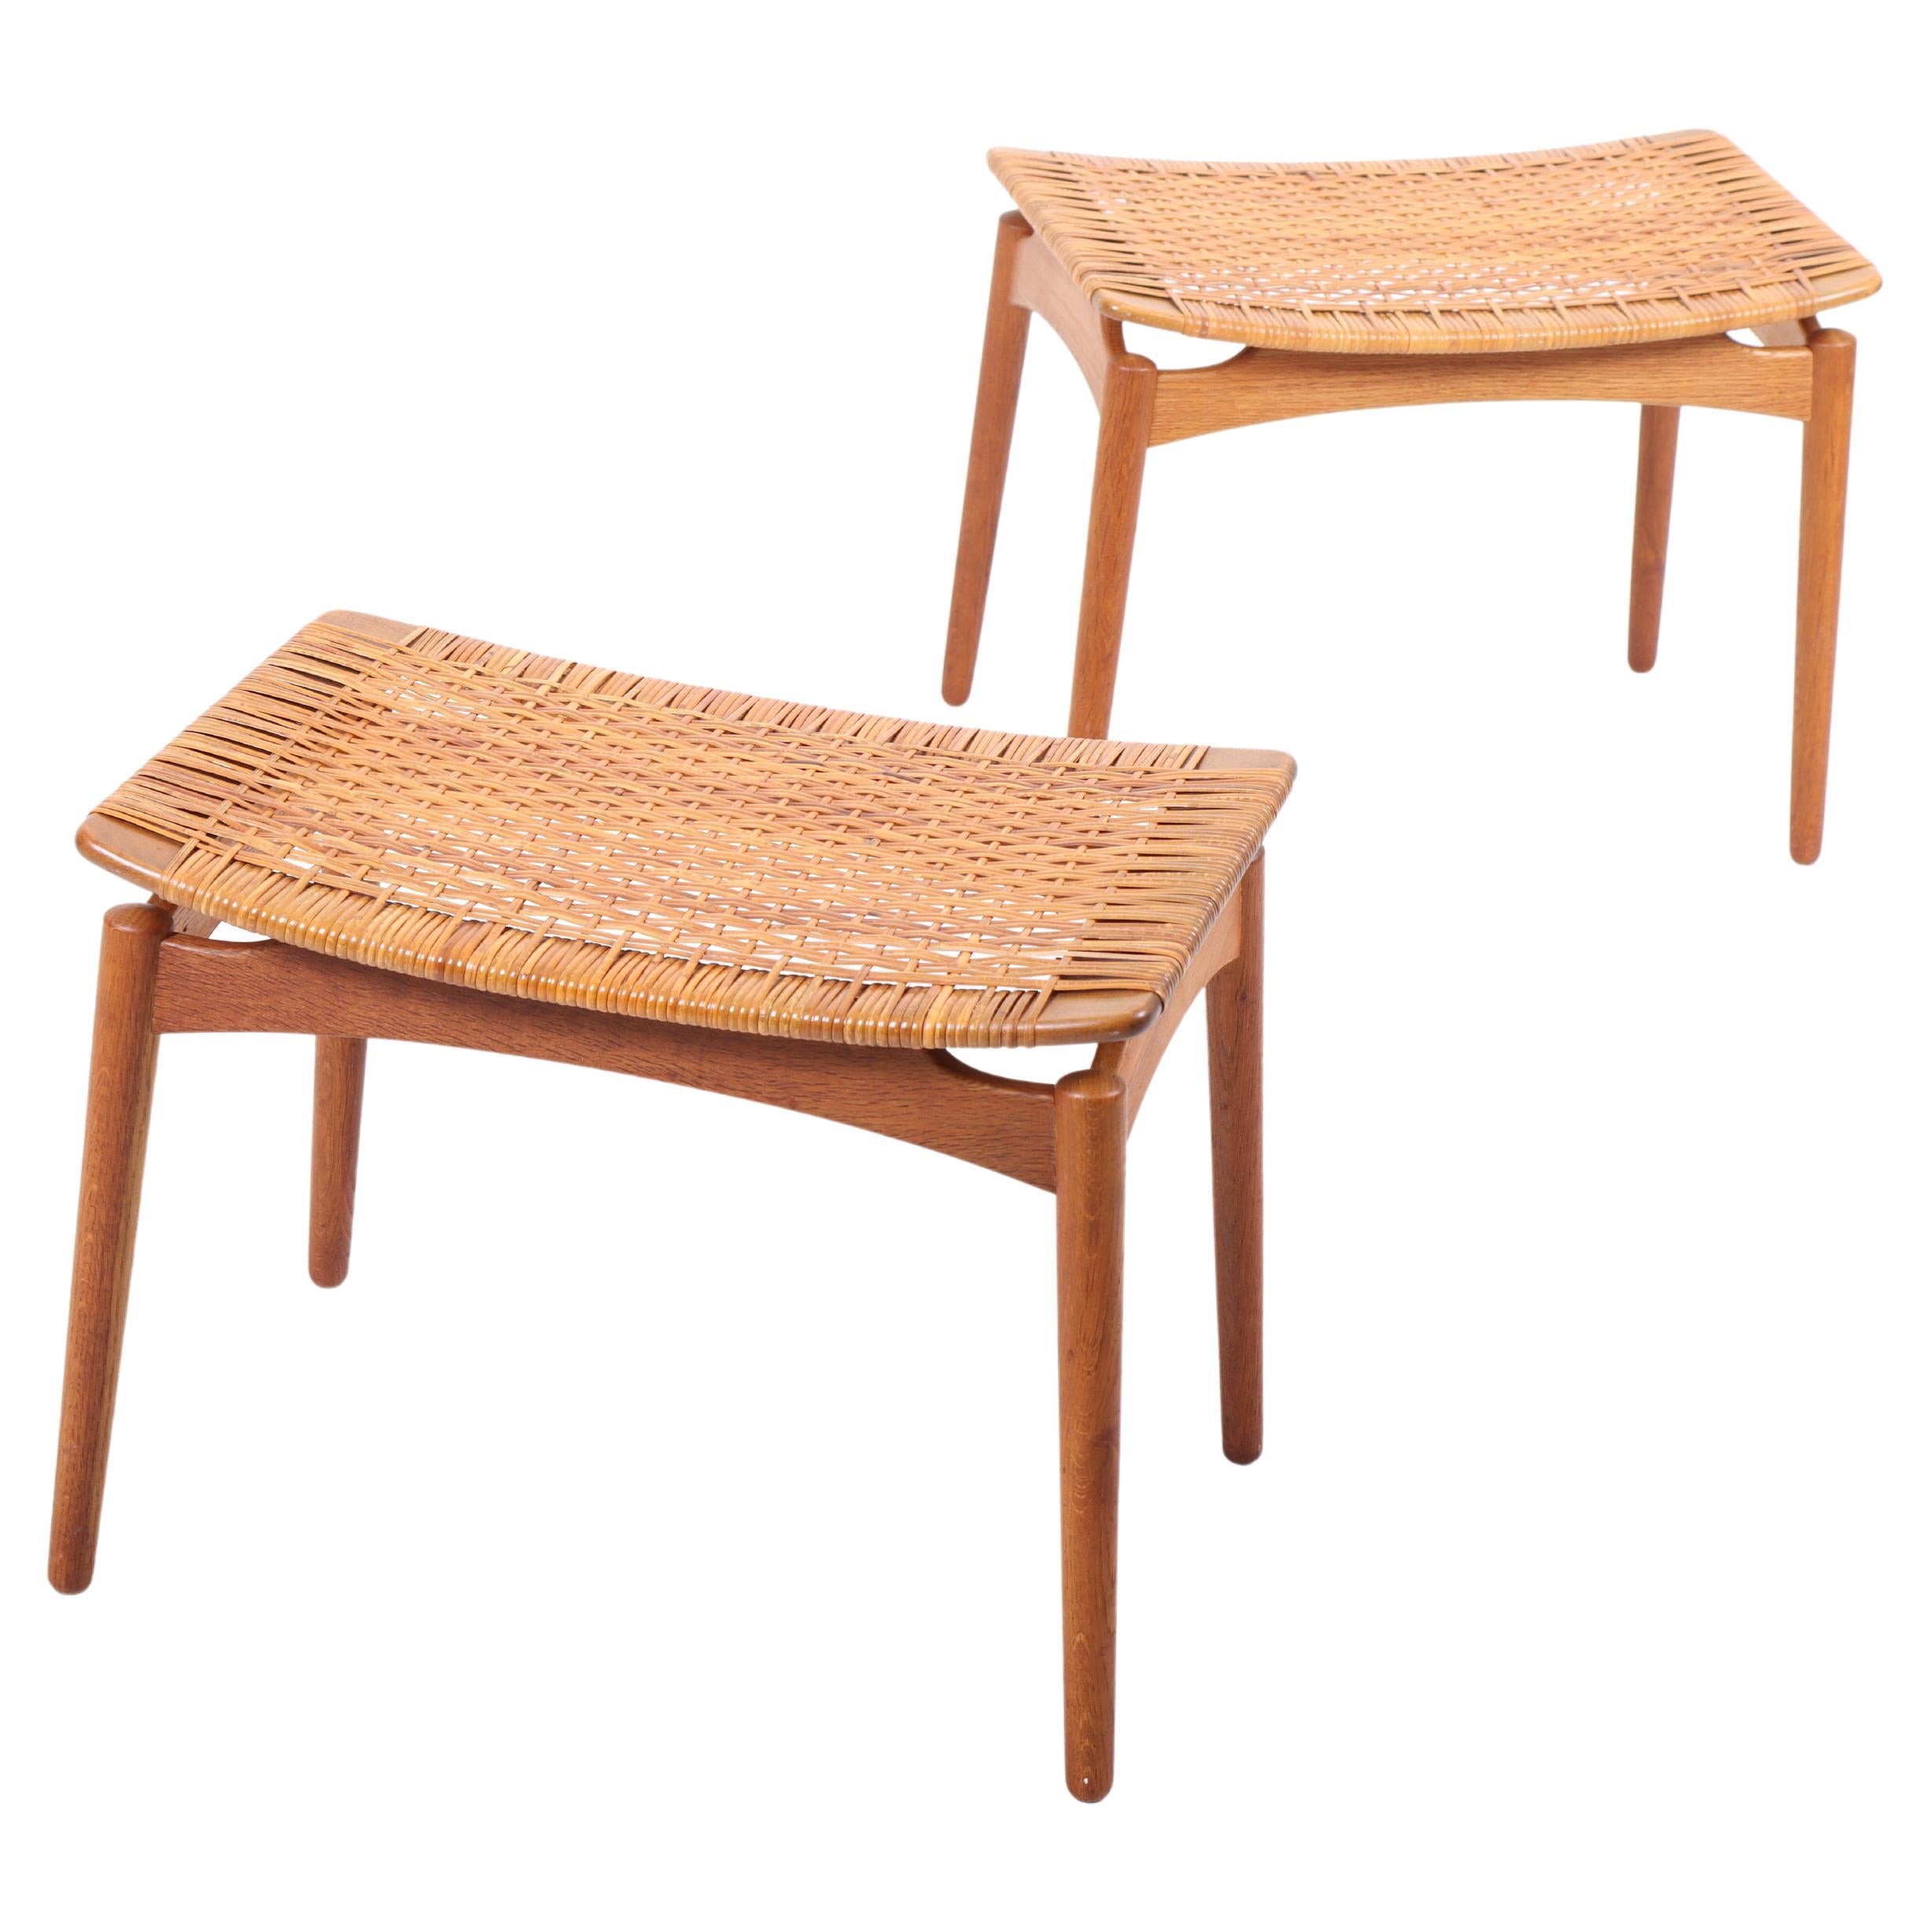 Pair of Stools in Patinated Oak and Cane, Made in Denmark 1950s